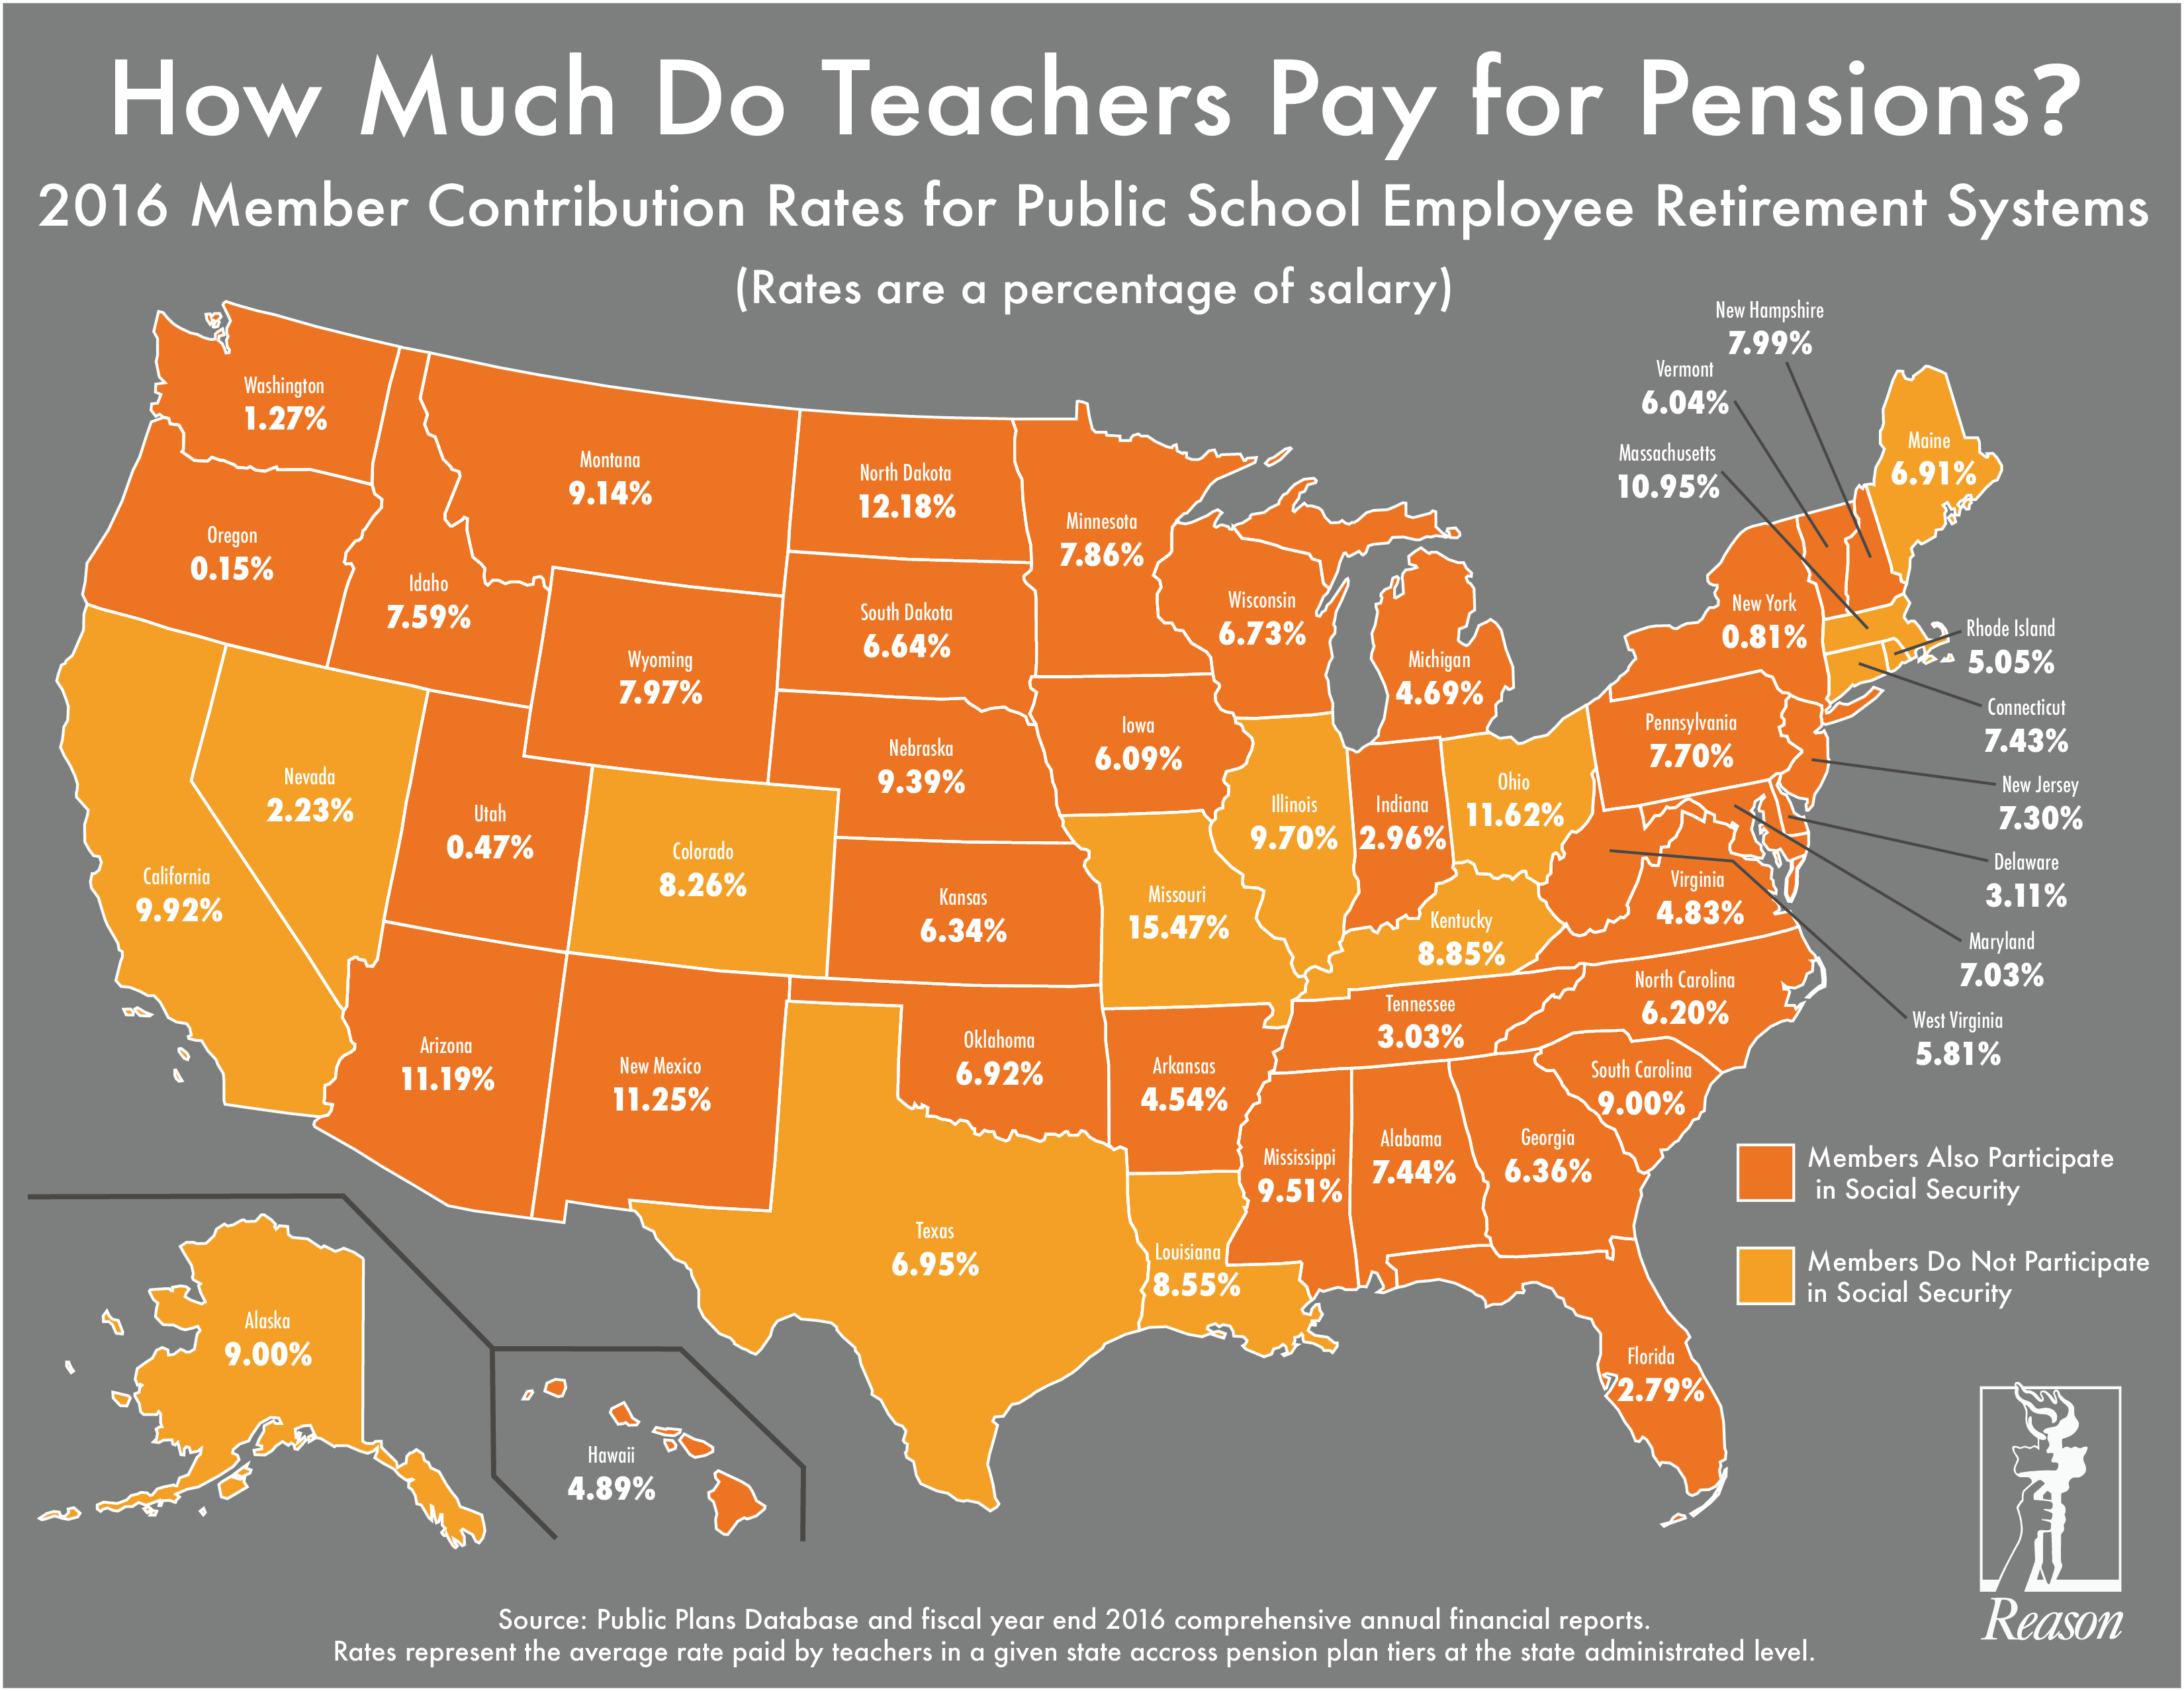 How Are Teacher Salaries Determined?